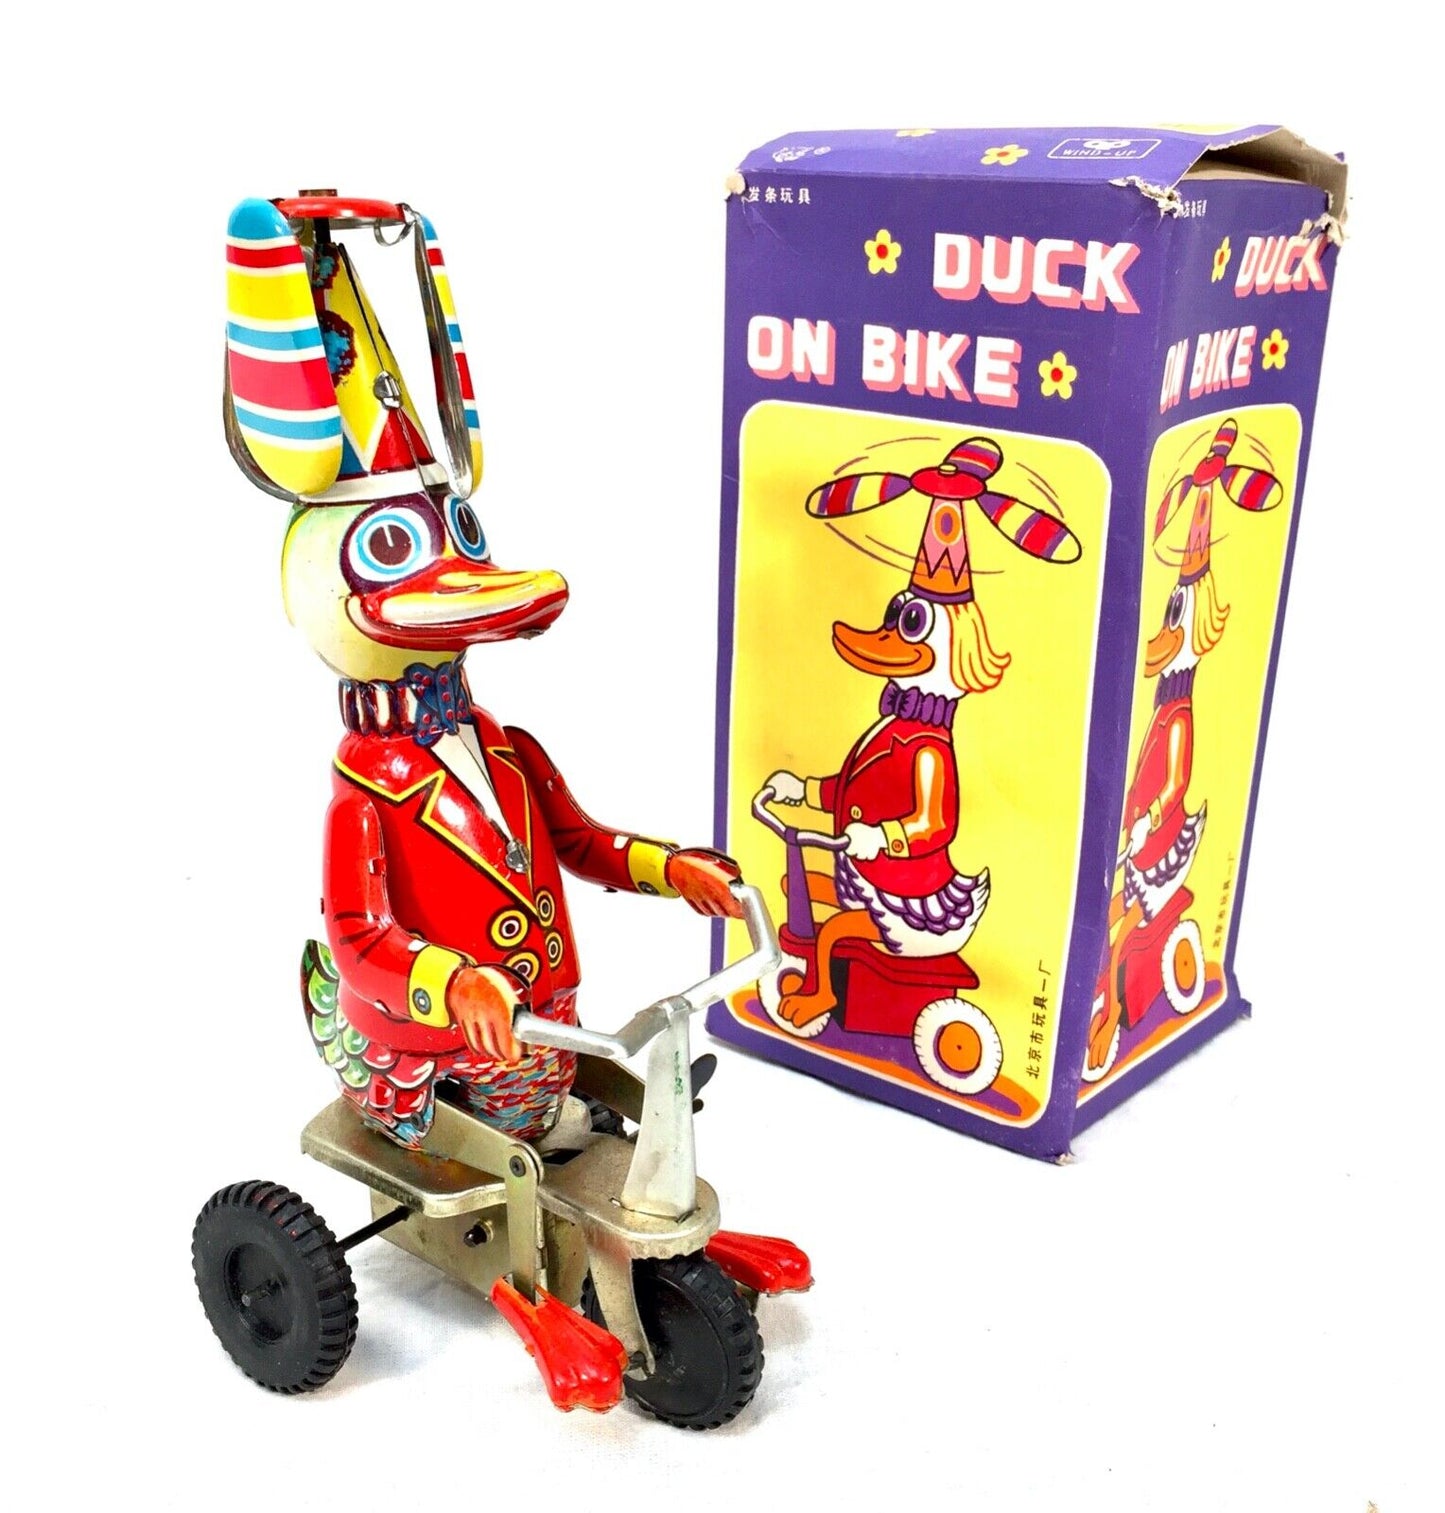 Vintage Wind-up Clockwork Tin Mechanical Wind-Up Duck on a Bike Toy / Boxed